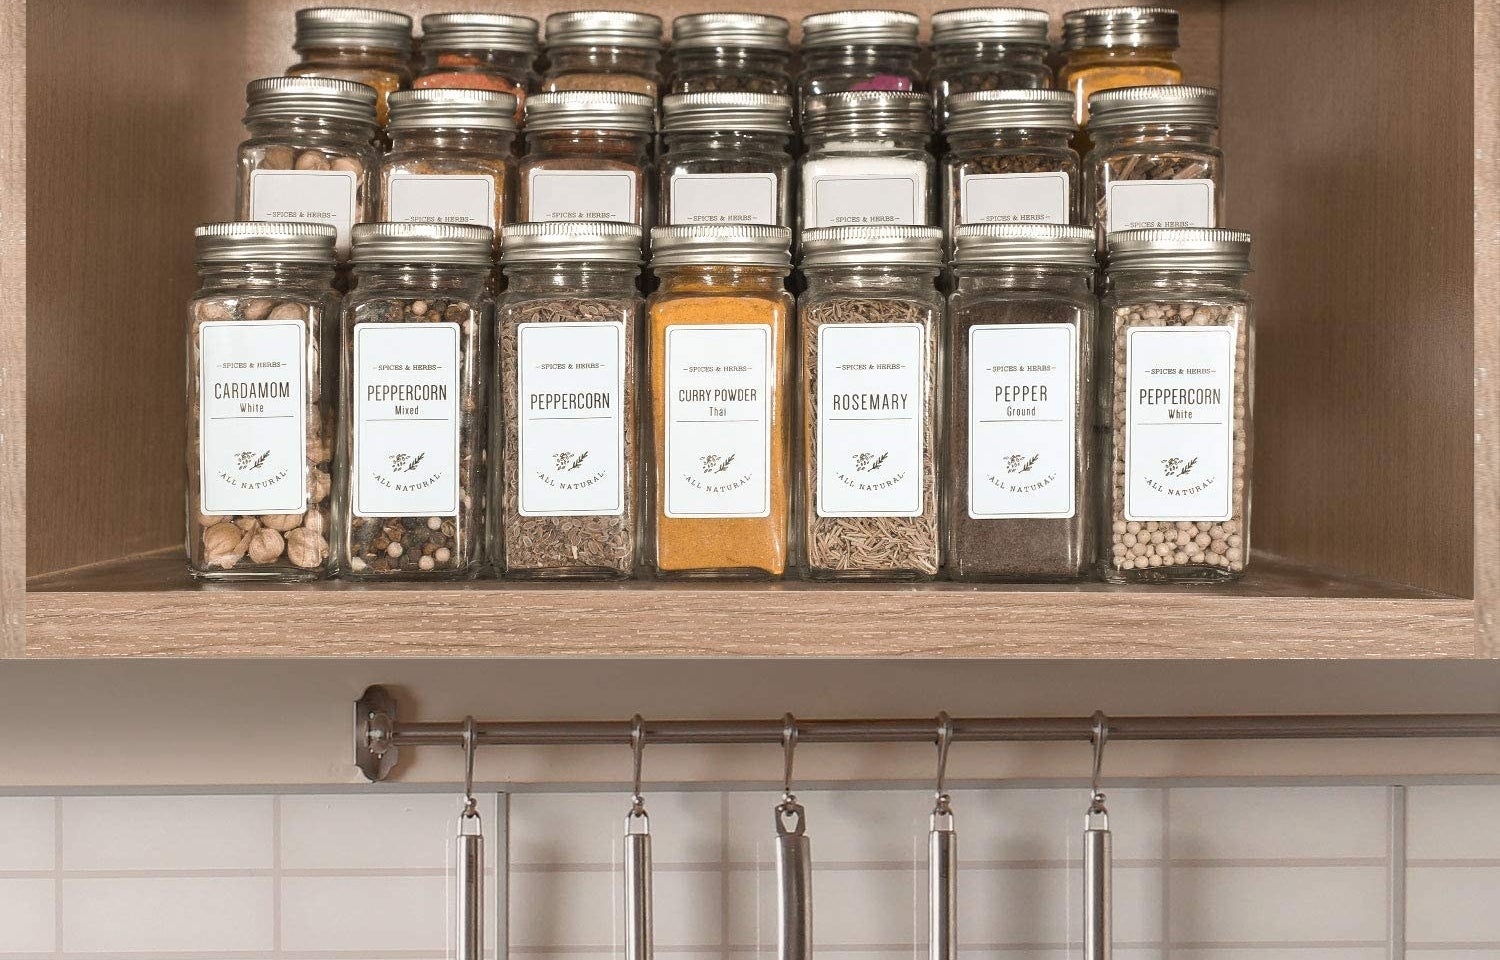 the 24-piece glass spice jar set with spice labels neatly organized in kitchen cabinet